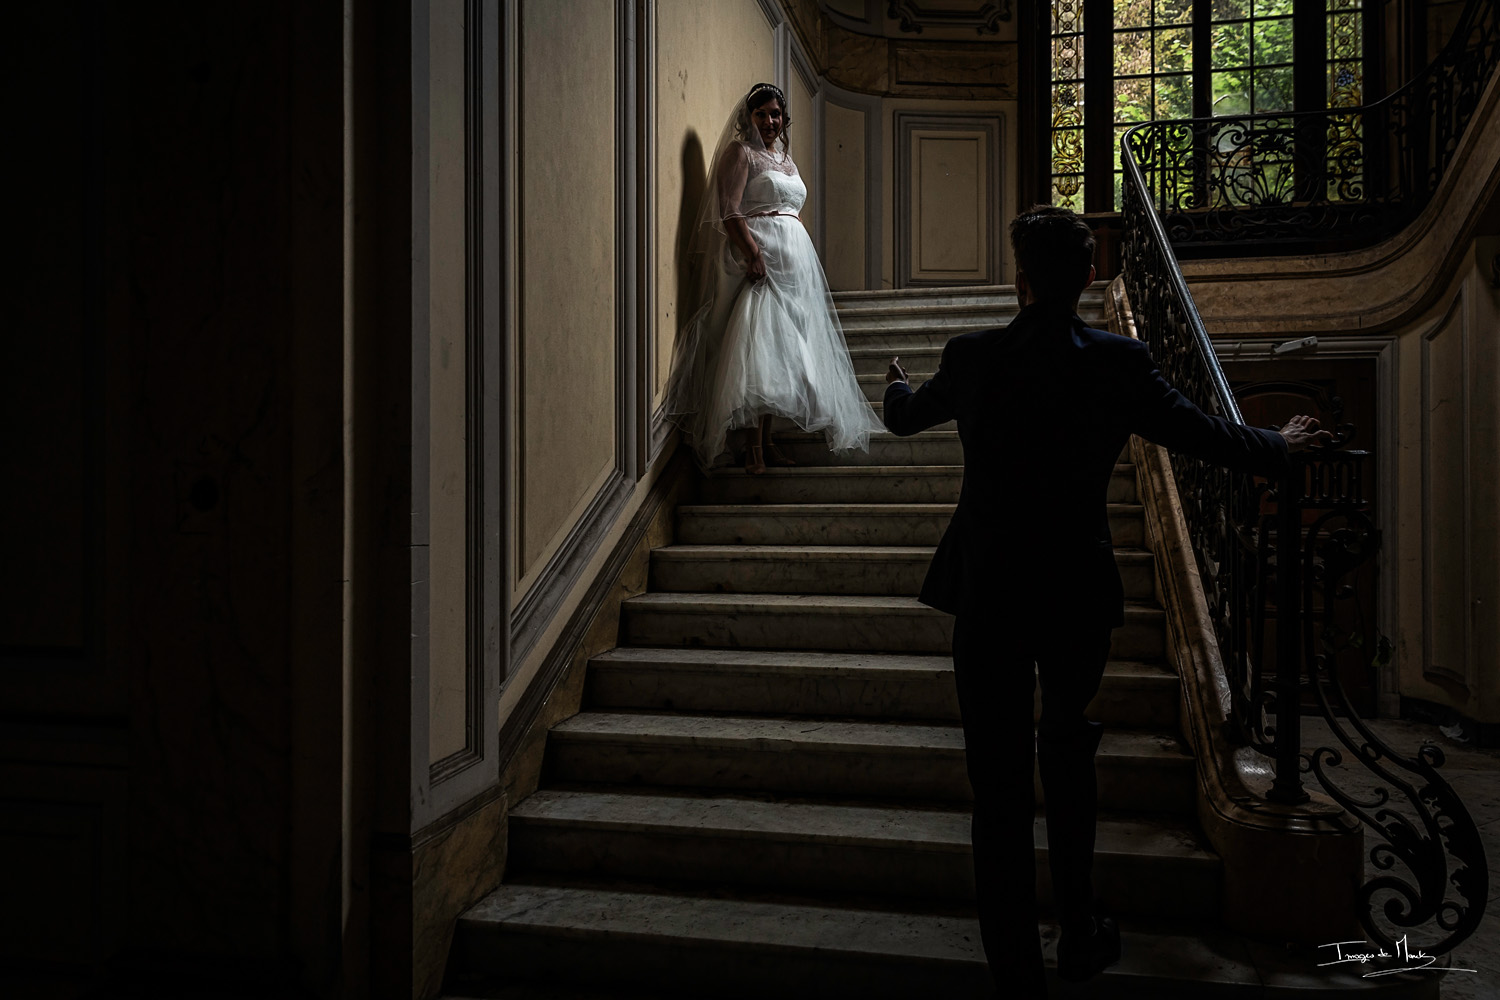 photographe mariage strasbourg alsace lorraine séance couple day after yvan marck imagesdemarck